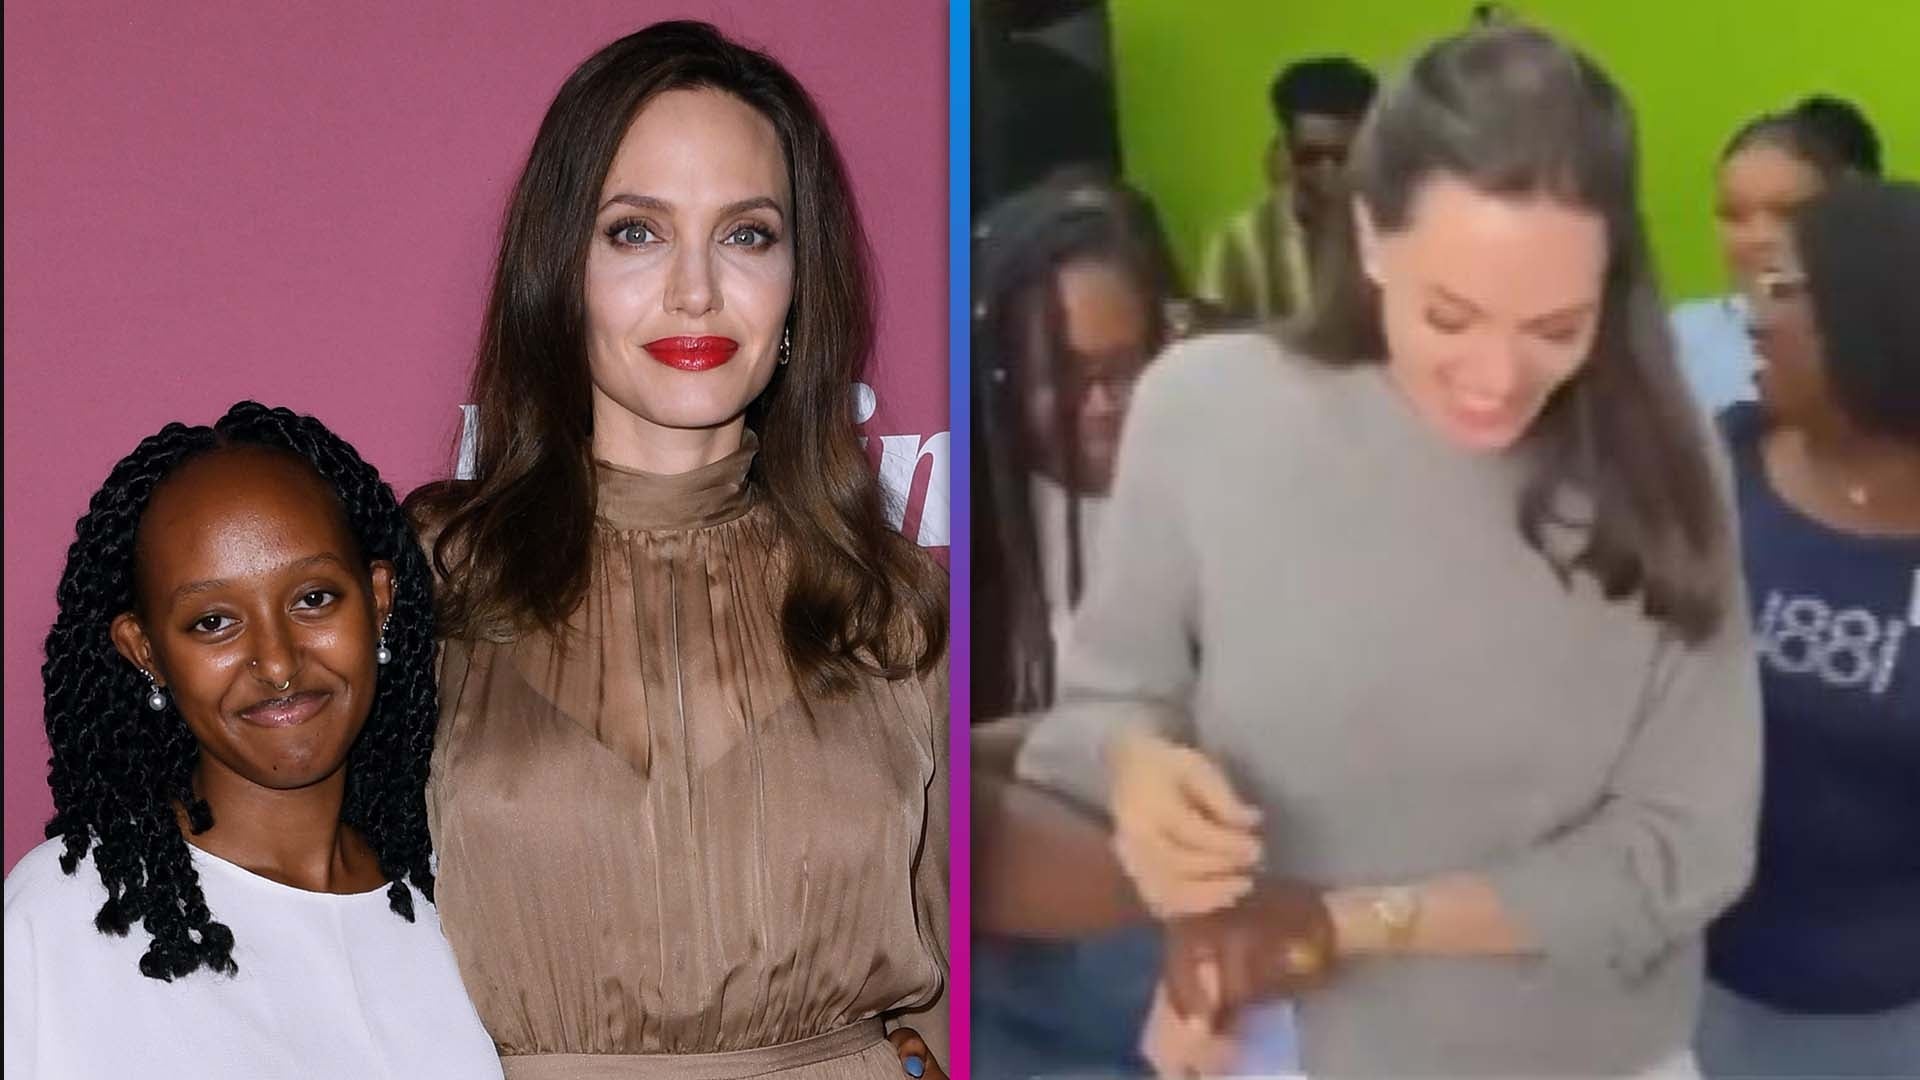 Young Angelina Jolie's Best '90s and Y2K Fashion Moments - Angelina Jolie  Red Carpet